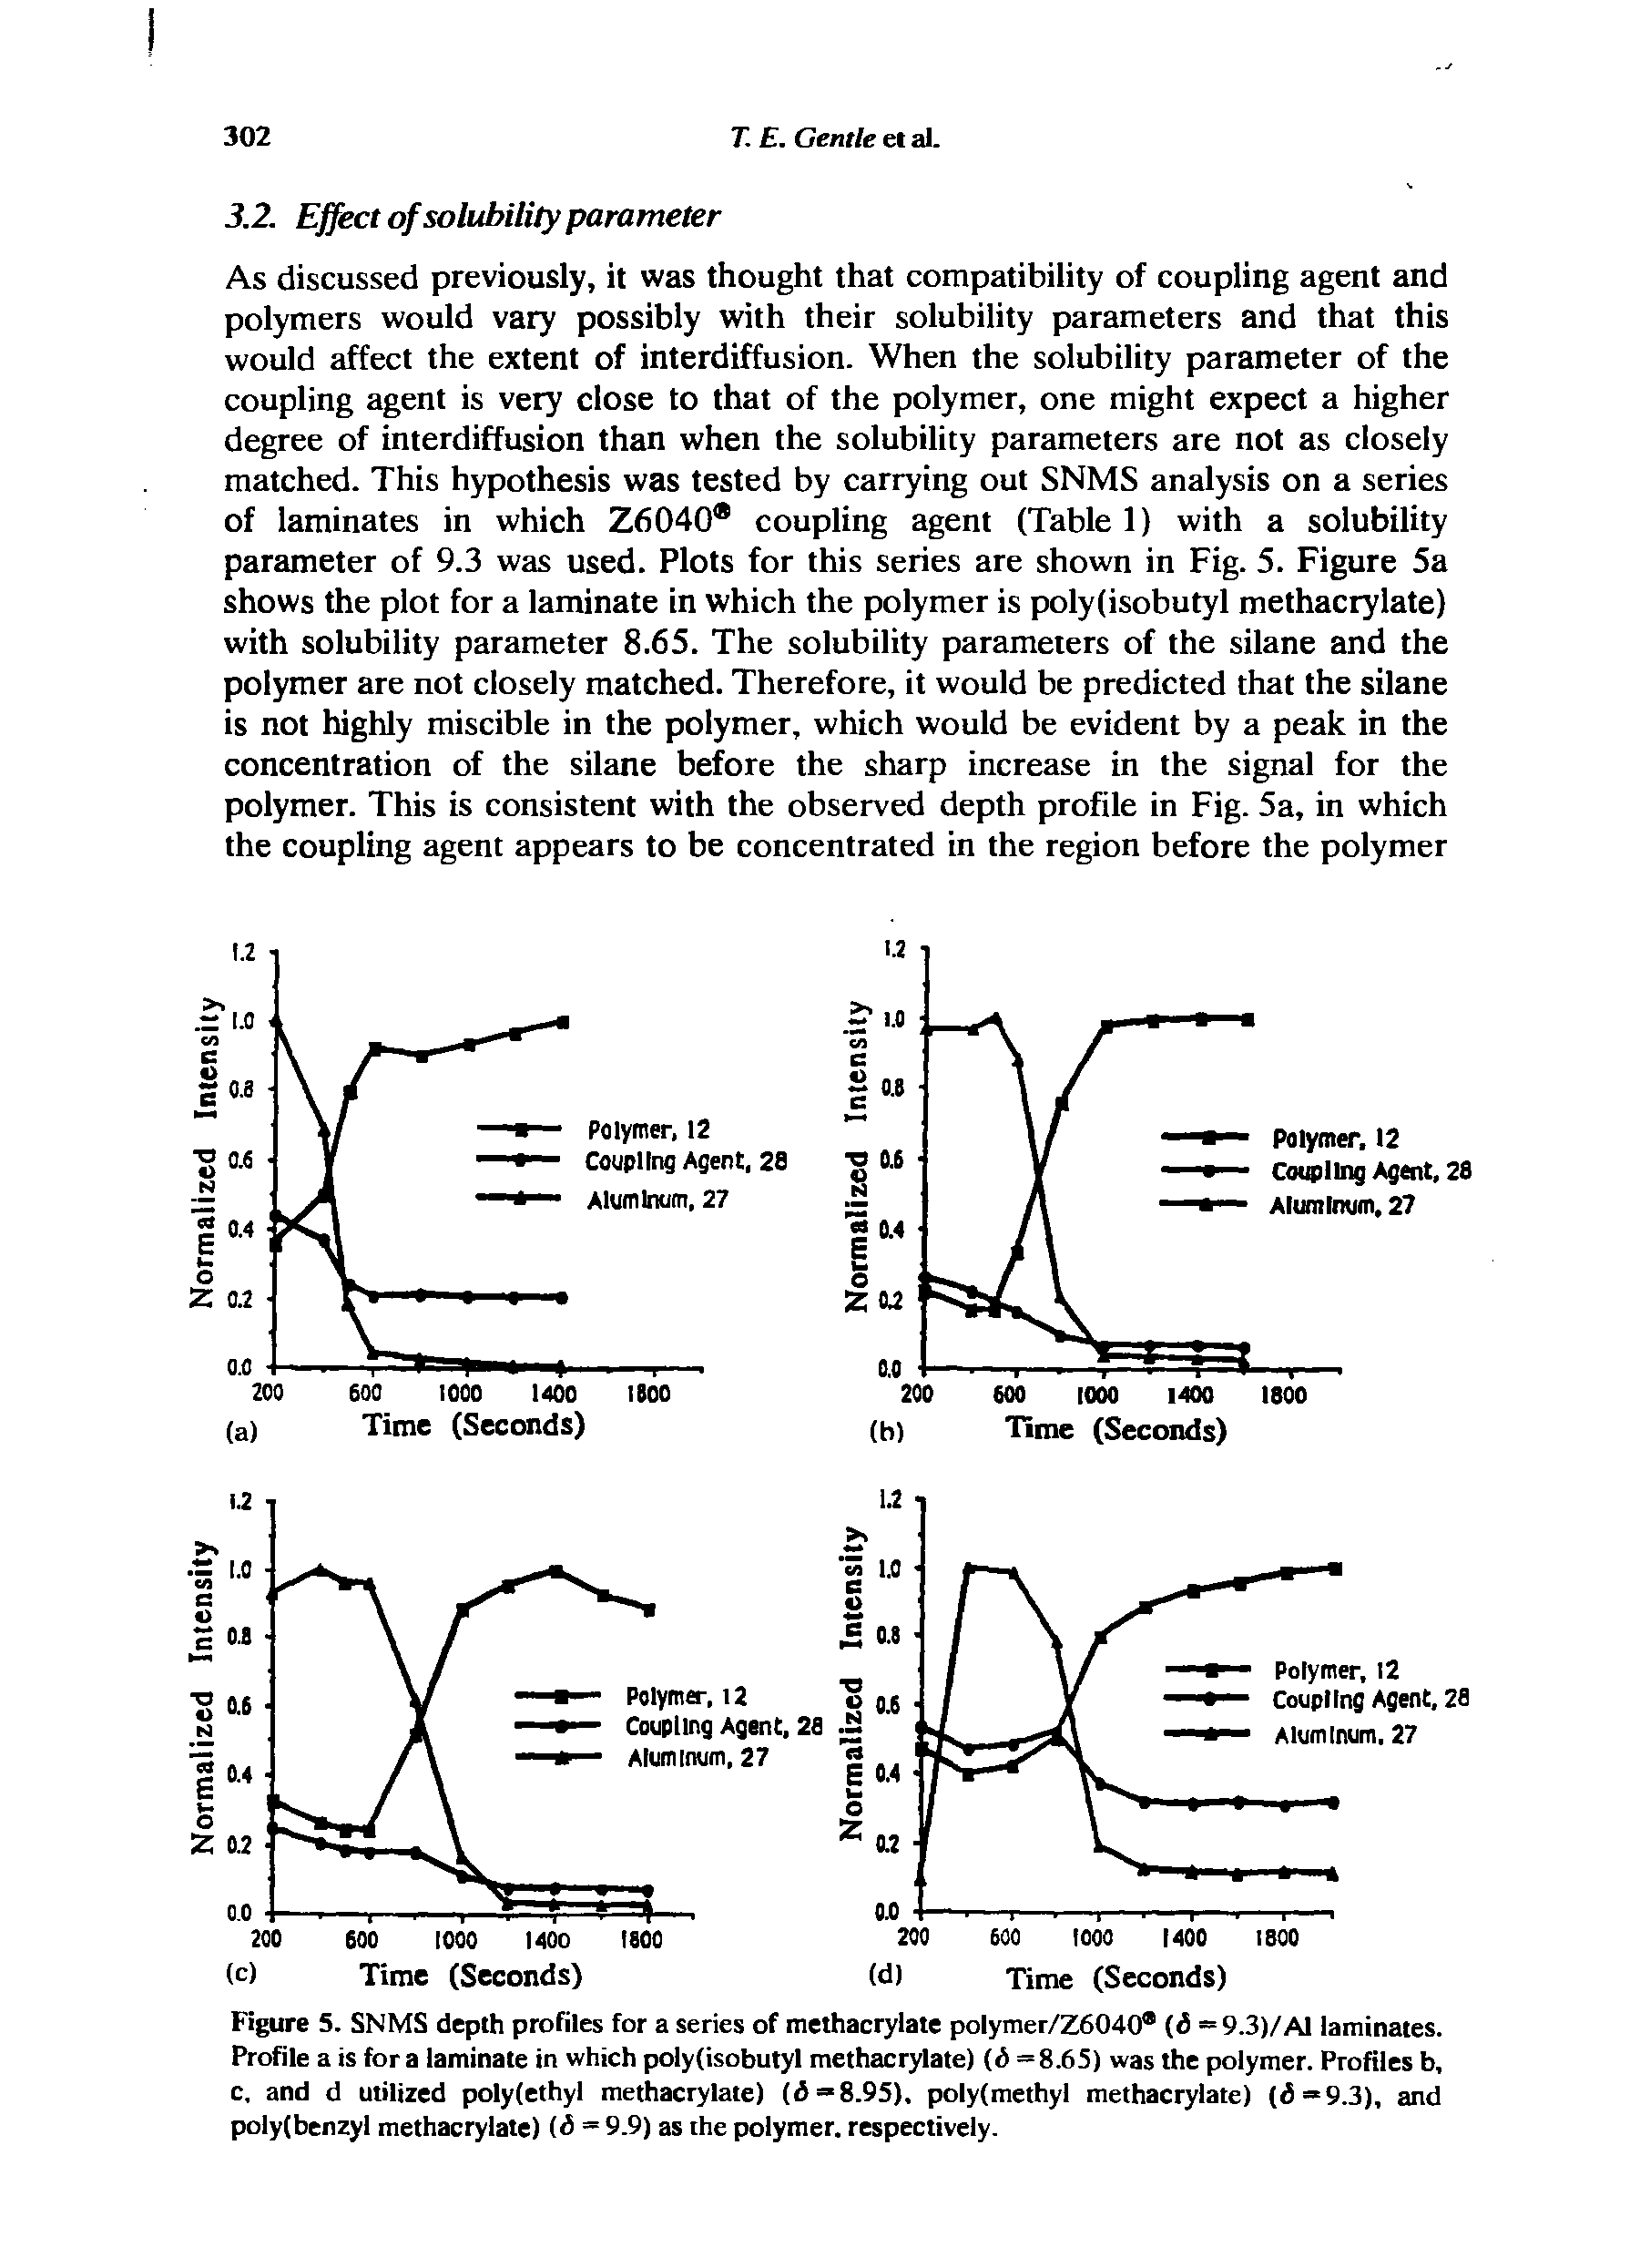 Figure 5. SNMS depth profiles for a series of methacrylate polymer/Z6040 (<5 =9.3)/Al laminates. Profile a is fora laminate in which polyfisobutyl methacrylate) (d =8.65) was the polymer. Profiles b, c, and d utilized polyfethyl methacrylate) (<5 = 8.95), poly (methyl methacrylate) (i=9.3), and poly(benzyl methacrylate) (d = 9.9) as the polymer, respectively.